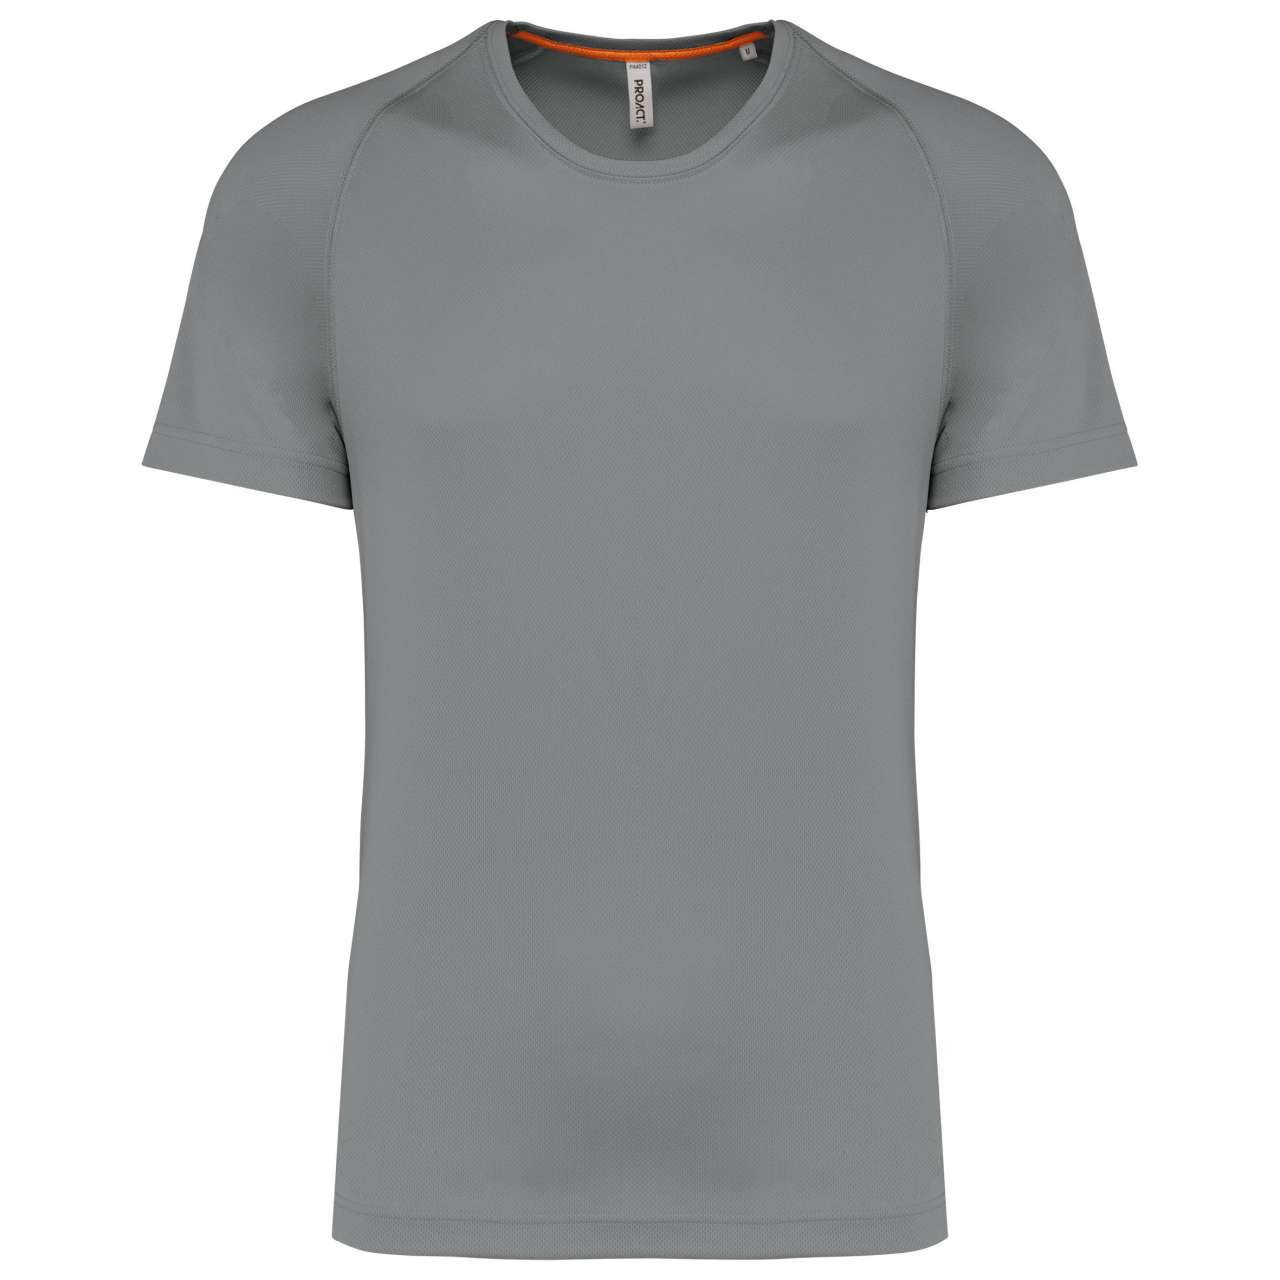 Promo  MEN'S RECYCLED ROUND NECK SPORTS T-SHIRT